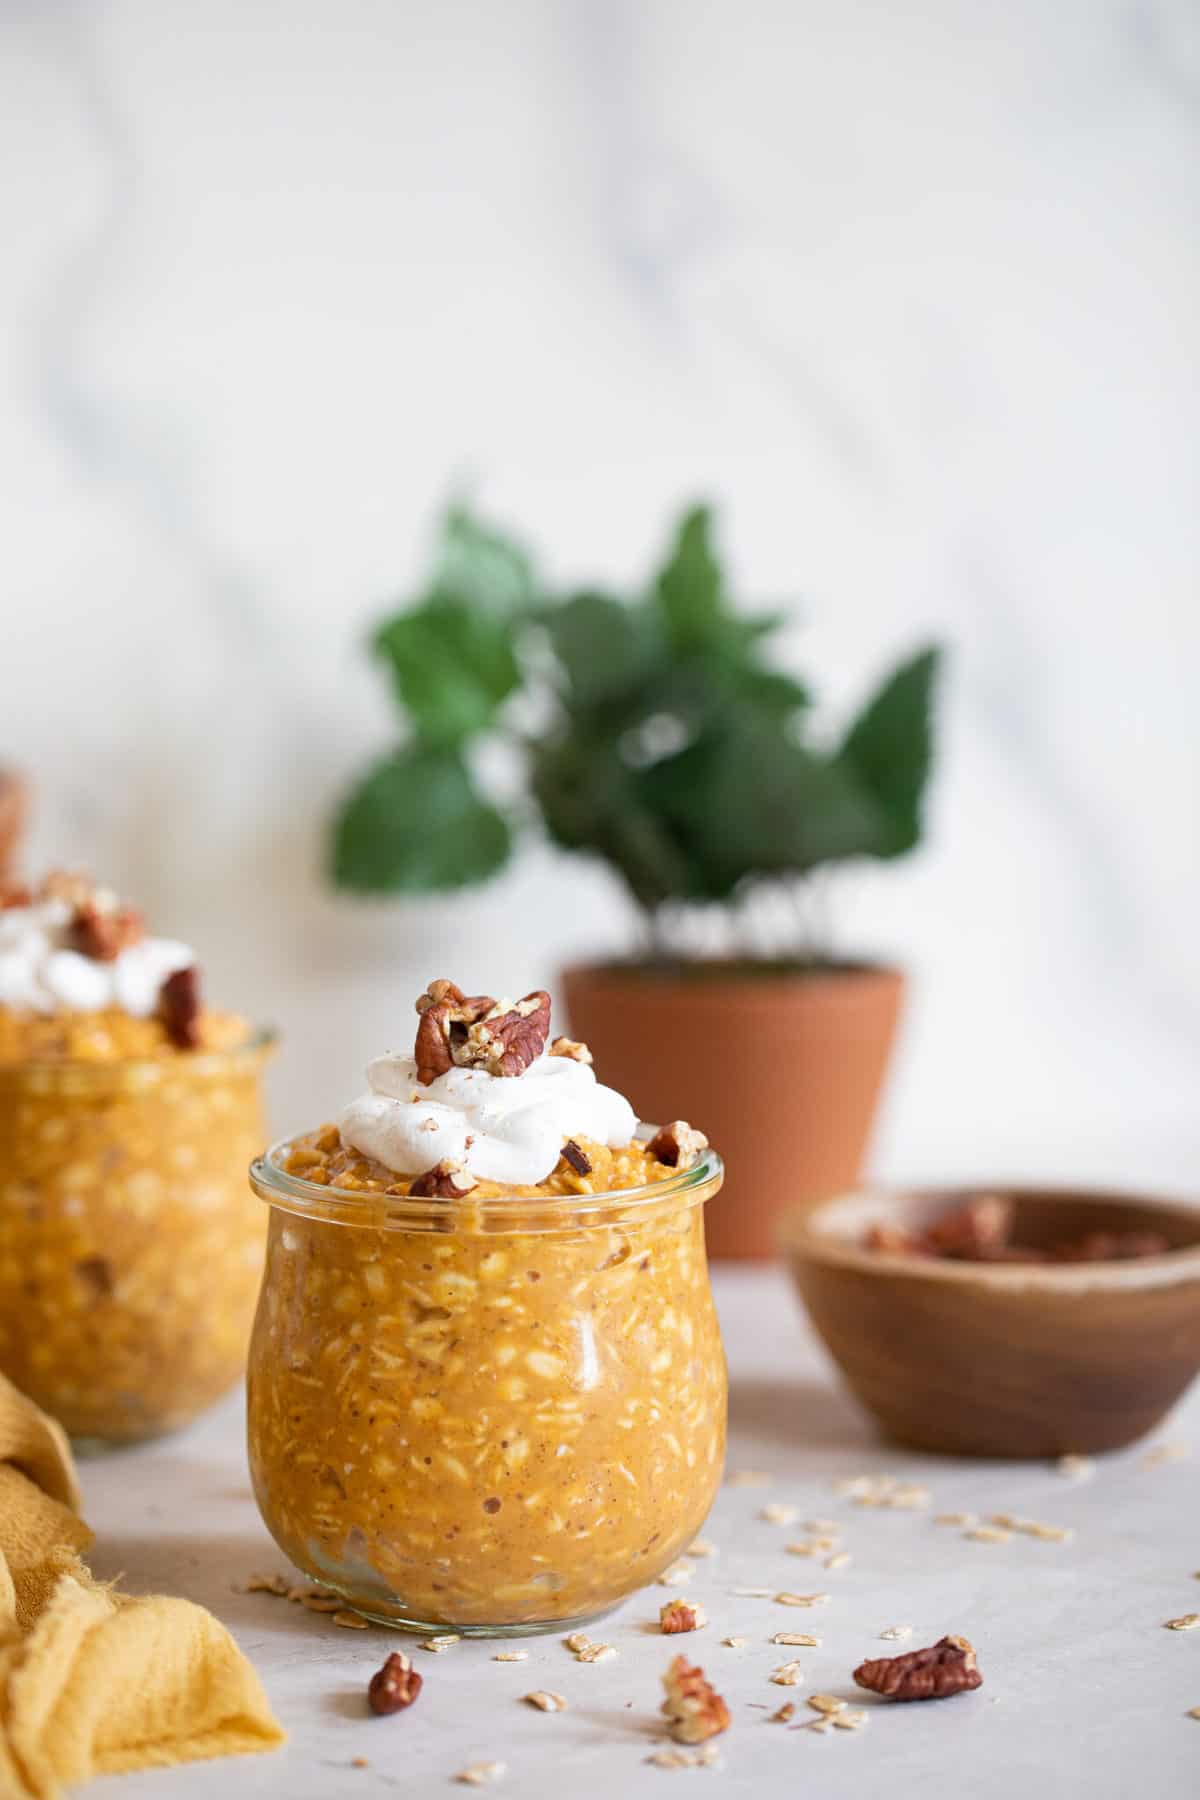 Pumpkin Spice Overnight Oats topped with whipped cream and nuts.